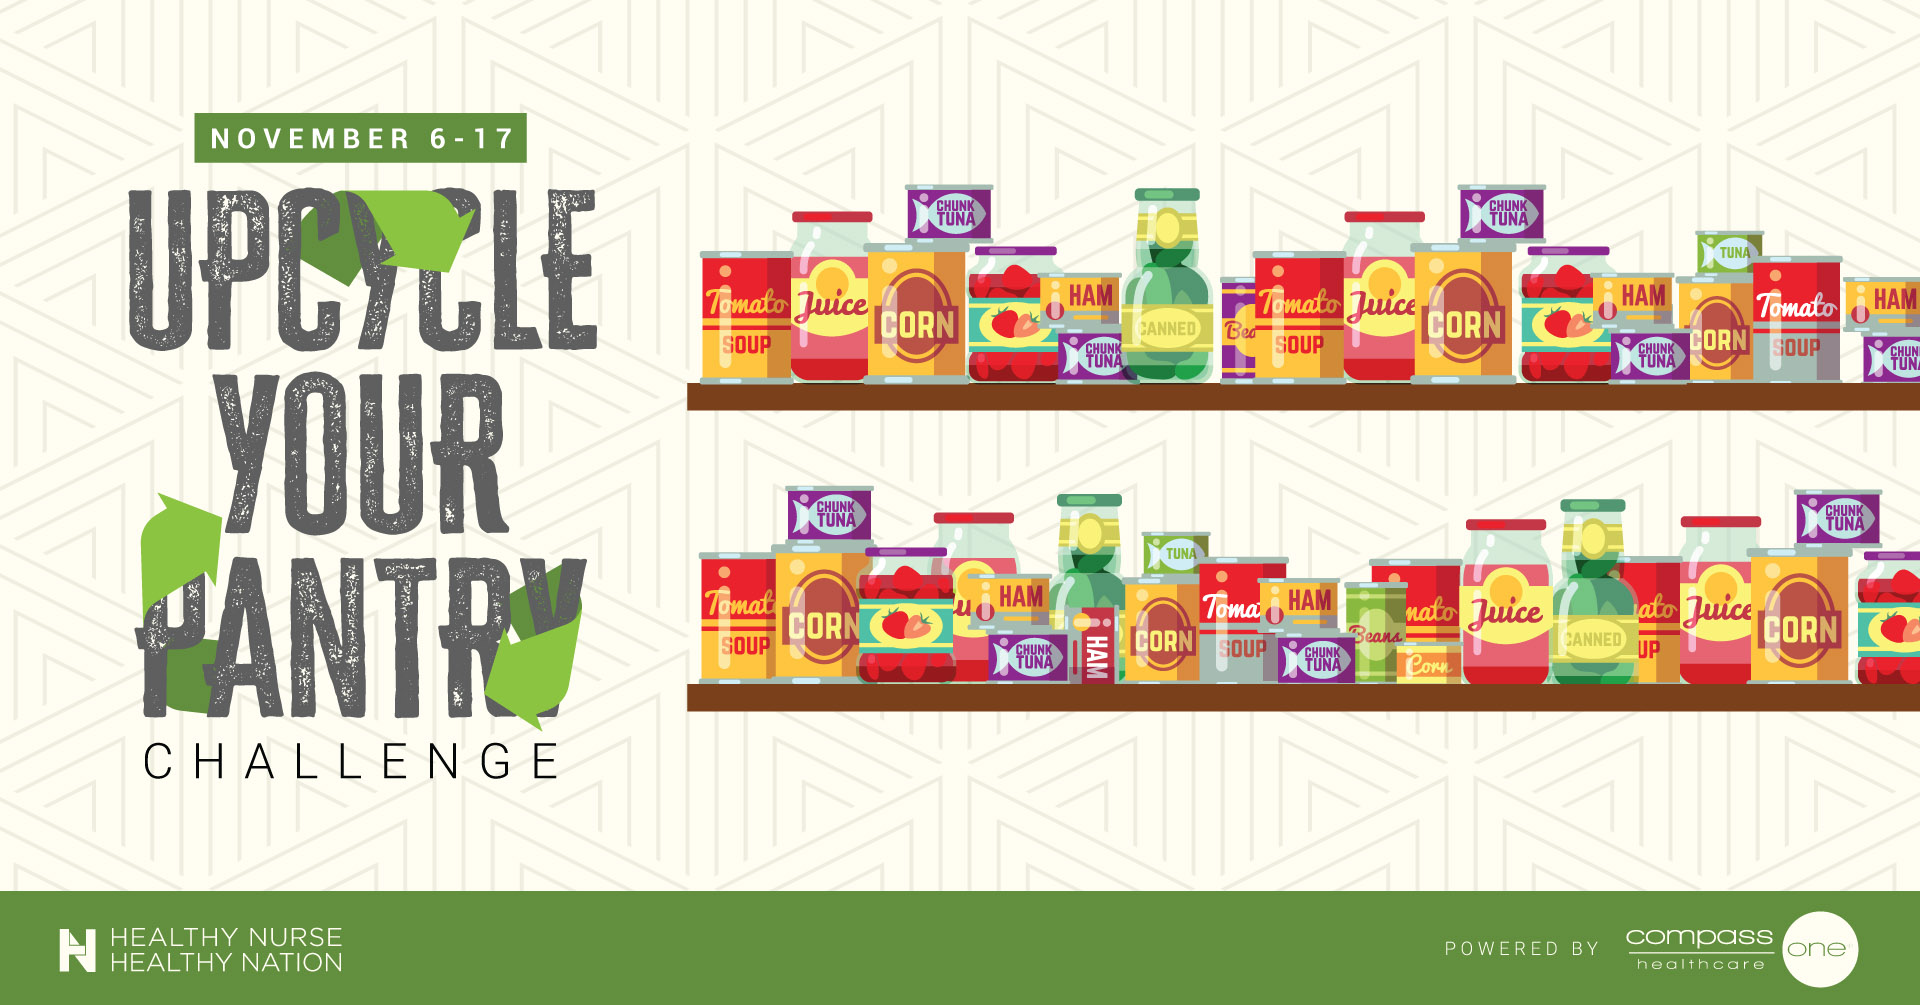 Take Inventory - Upcycle Your Pantry challenge, powered by Compass One Healthcare - Day 1 Tip 4594